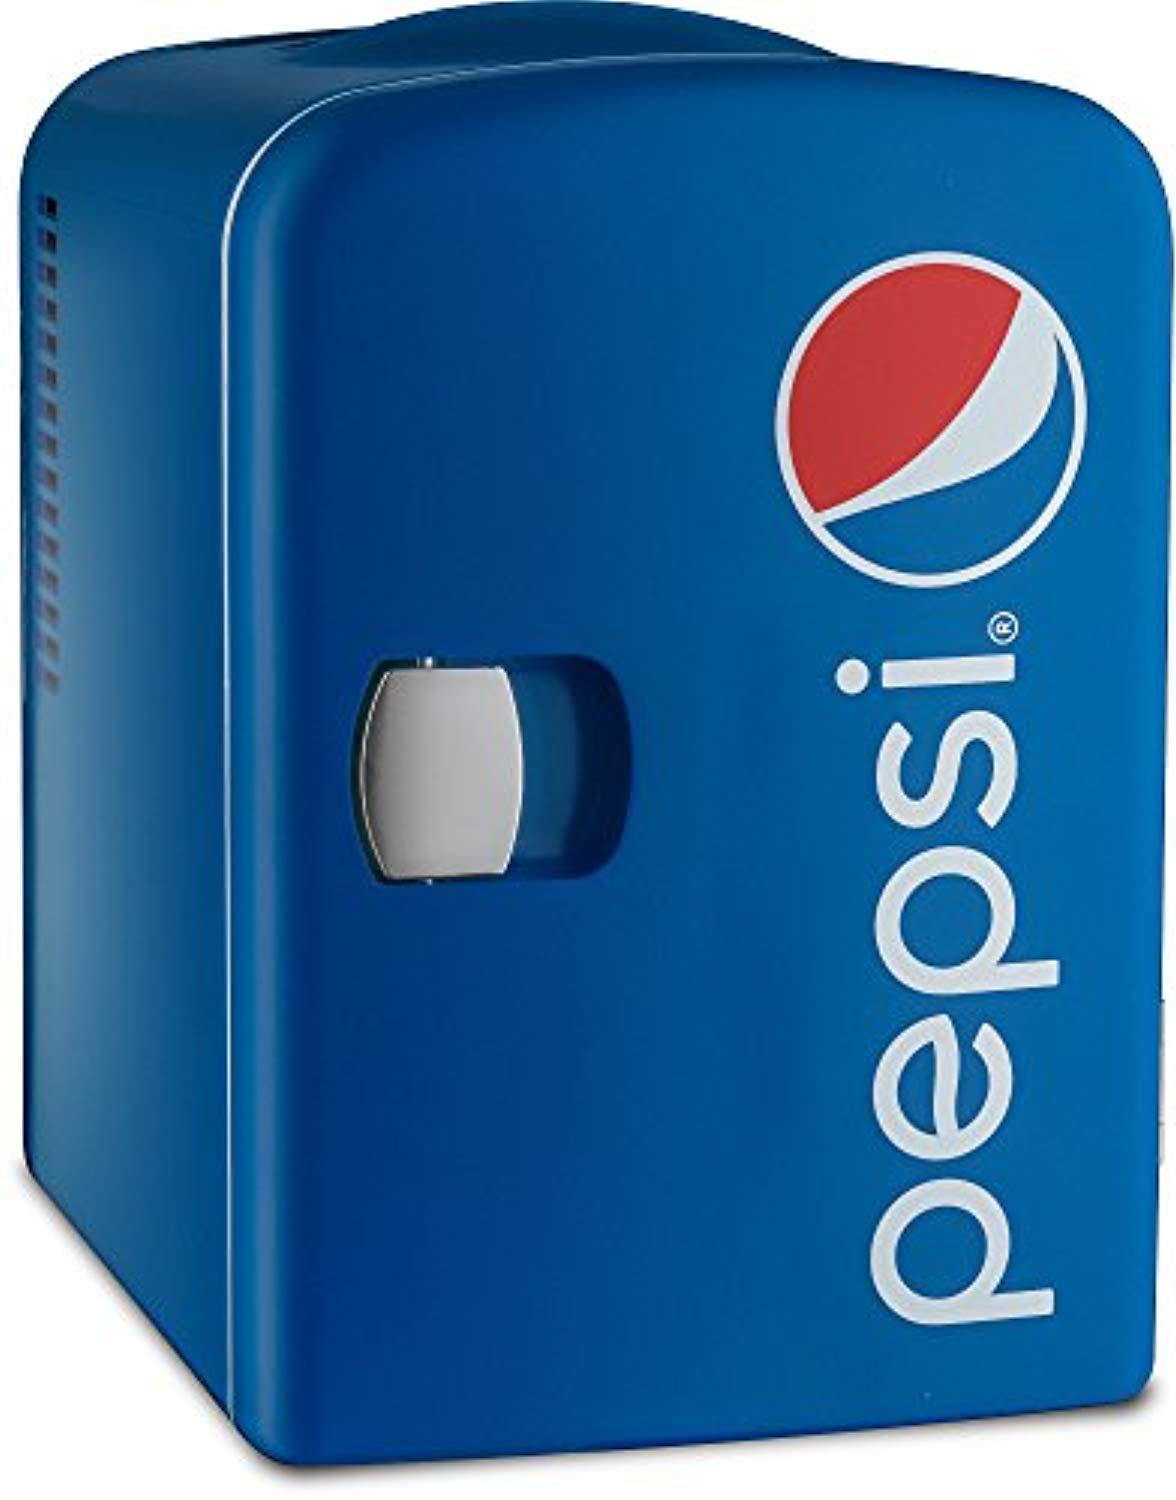 Gourmia GMF660 Pepsi Thermoelectric Mini Fridge Cooler and Warmer - 4 Liter/ 6 Can - For Home,Office, Car, Dorm or Boat - Compact & Portable - AC & DC Power Cords - Blue